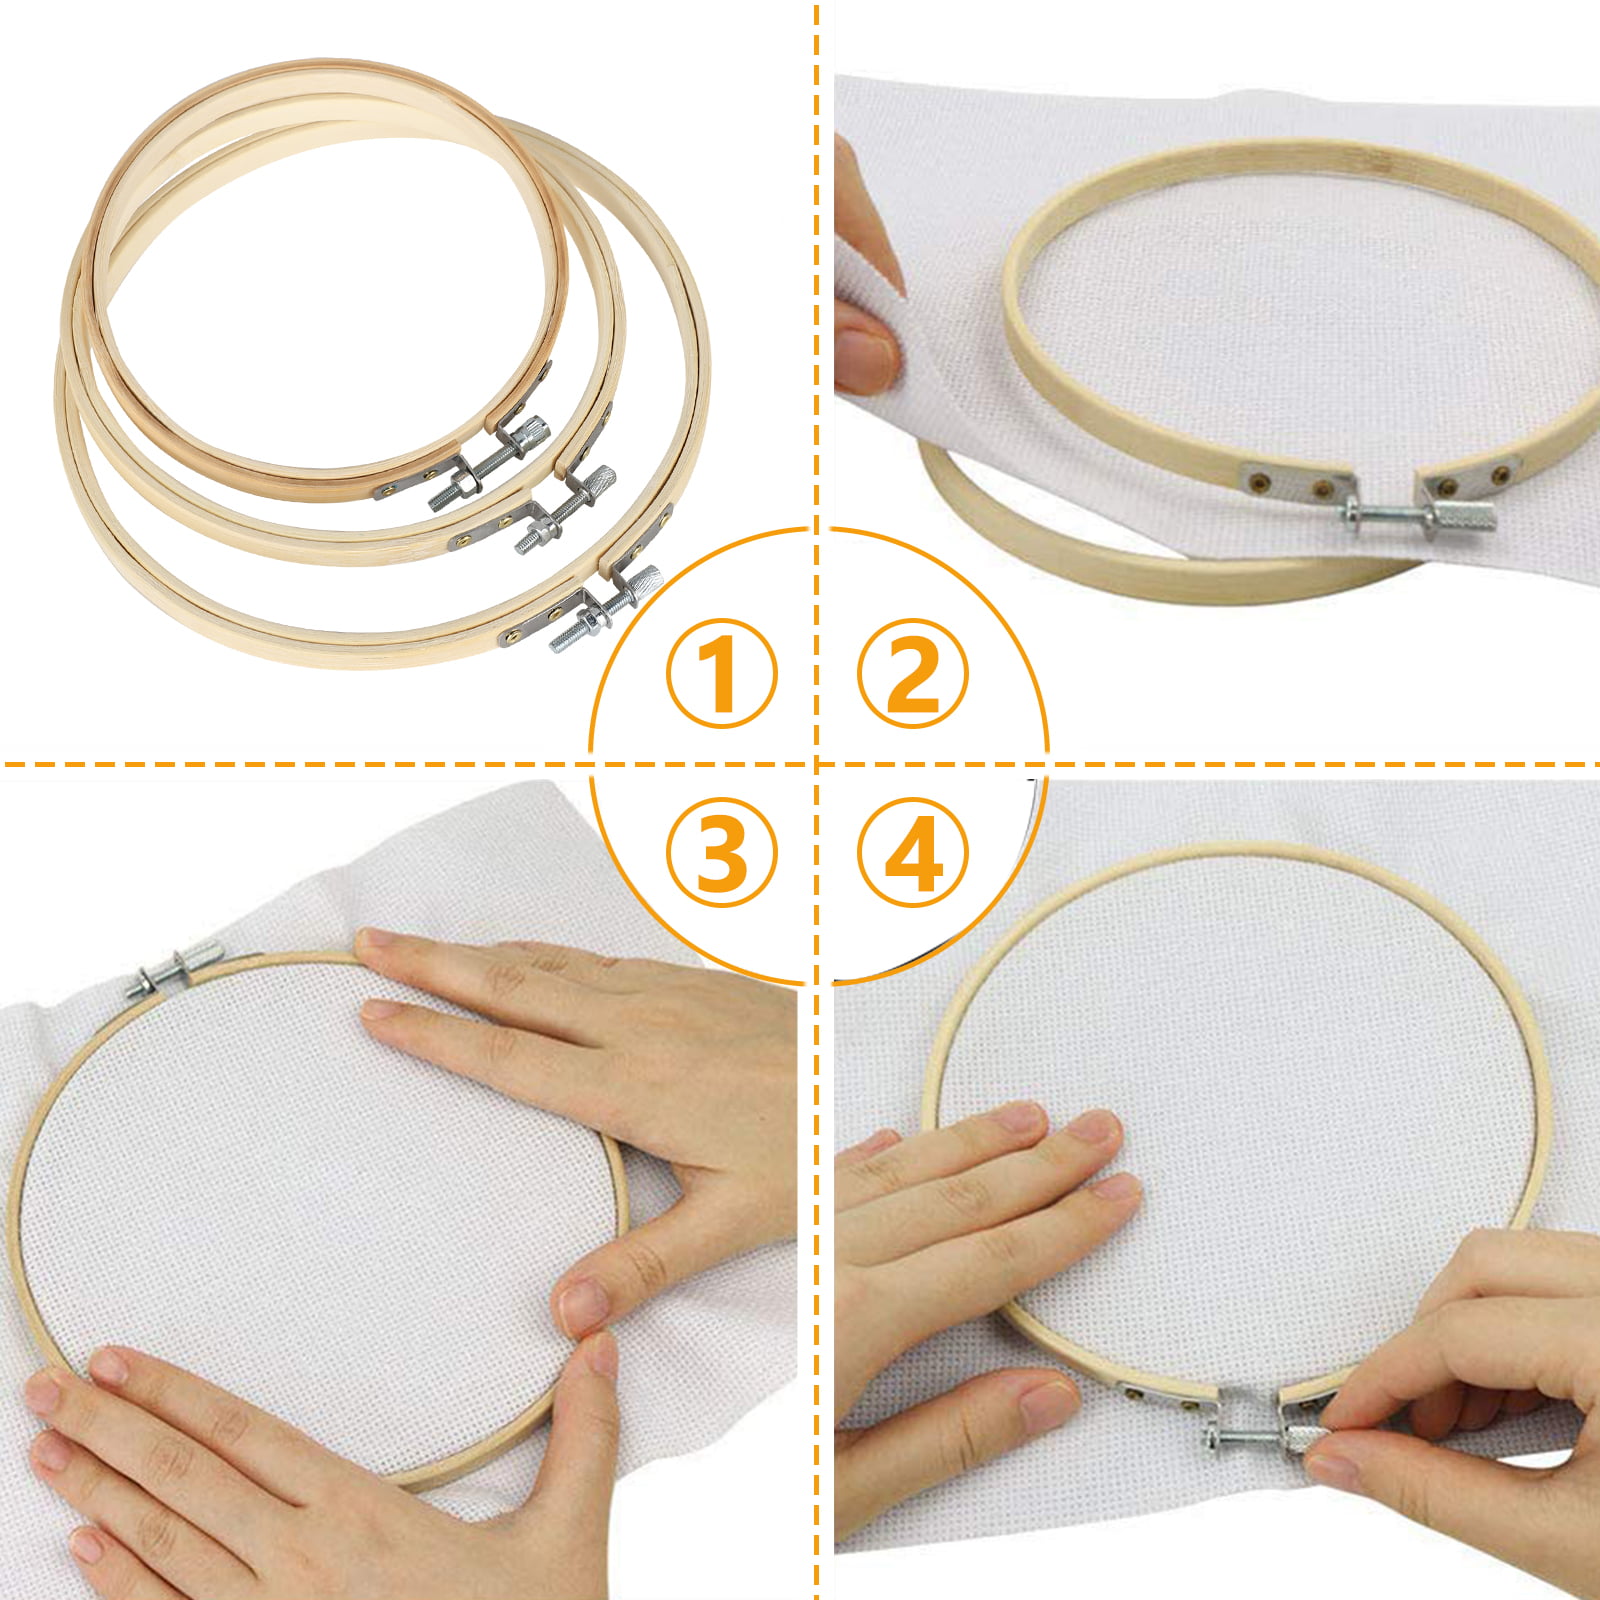 Cldamecy 5 Pieces Embroidery Hoops 5 inch to 10 inch Round Bamboo  Adjustable Frame Circle Cross Stitch Hoop for Embroidery Decoration and Art  Craft Sewing 5 different sizes